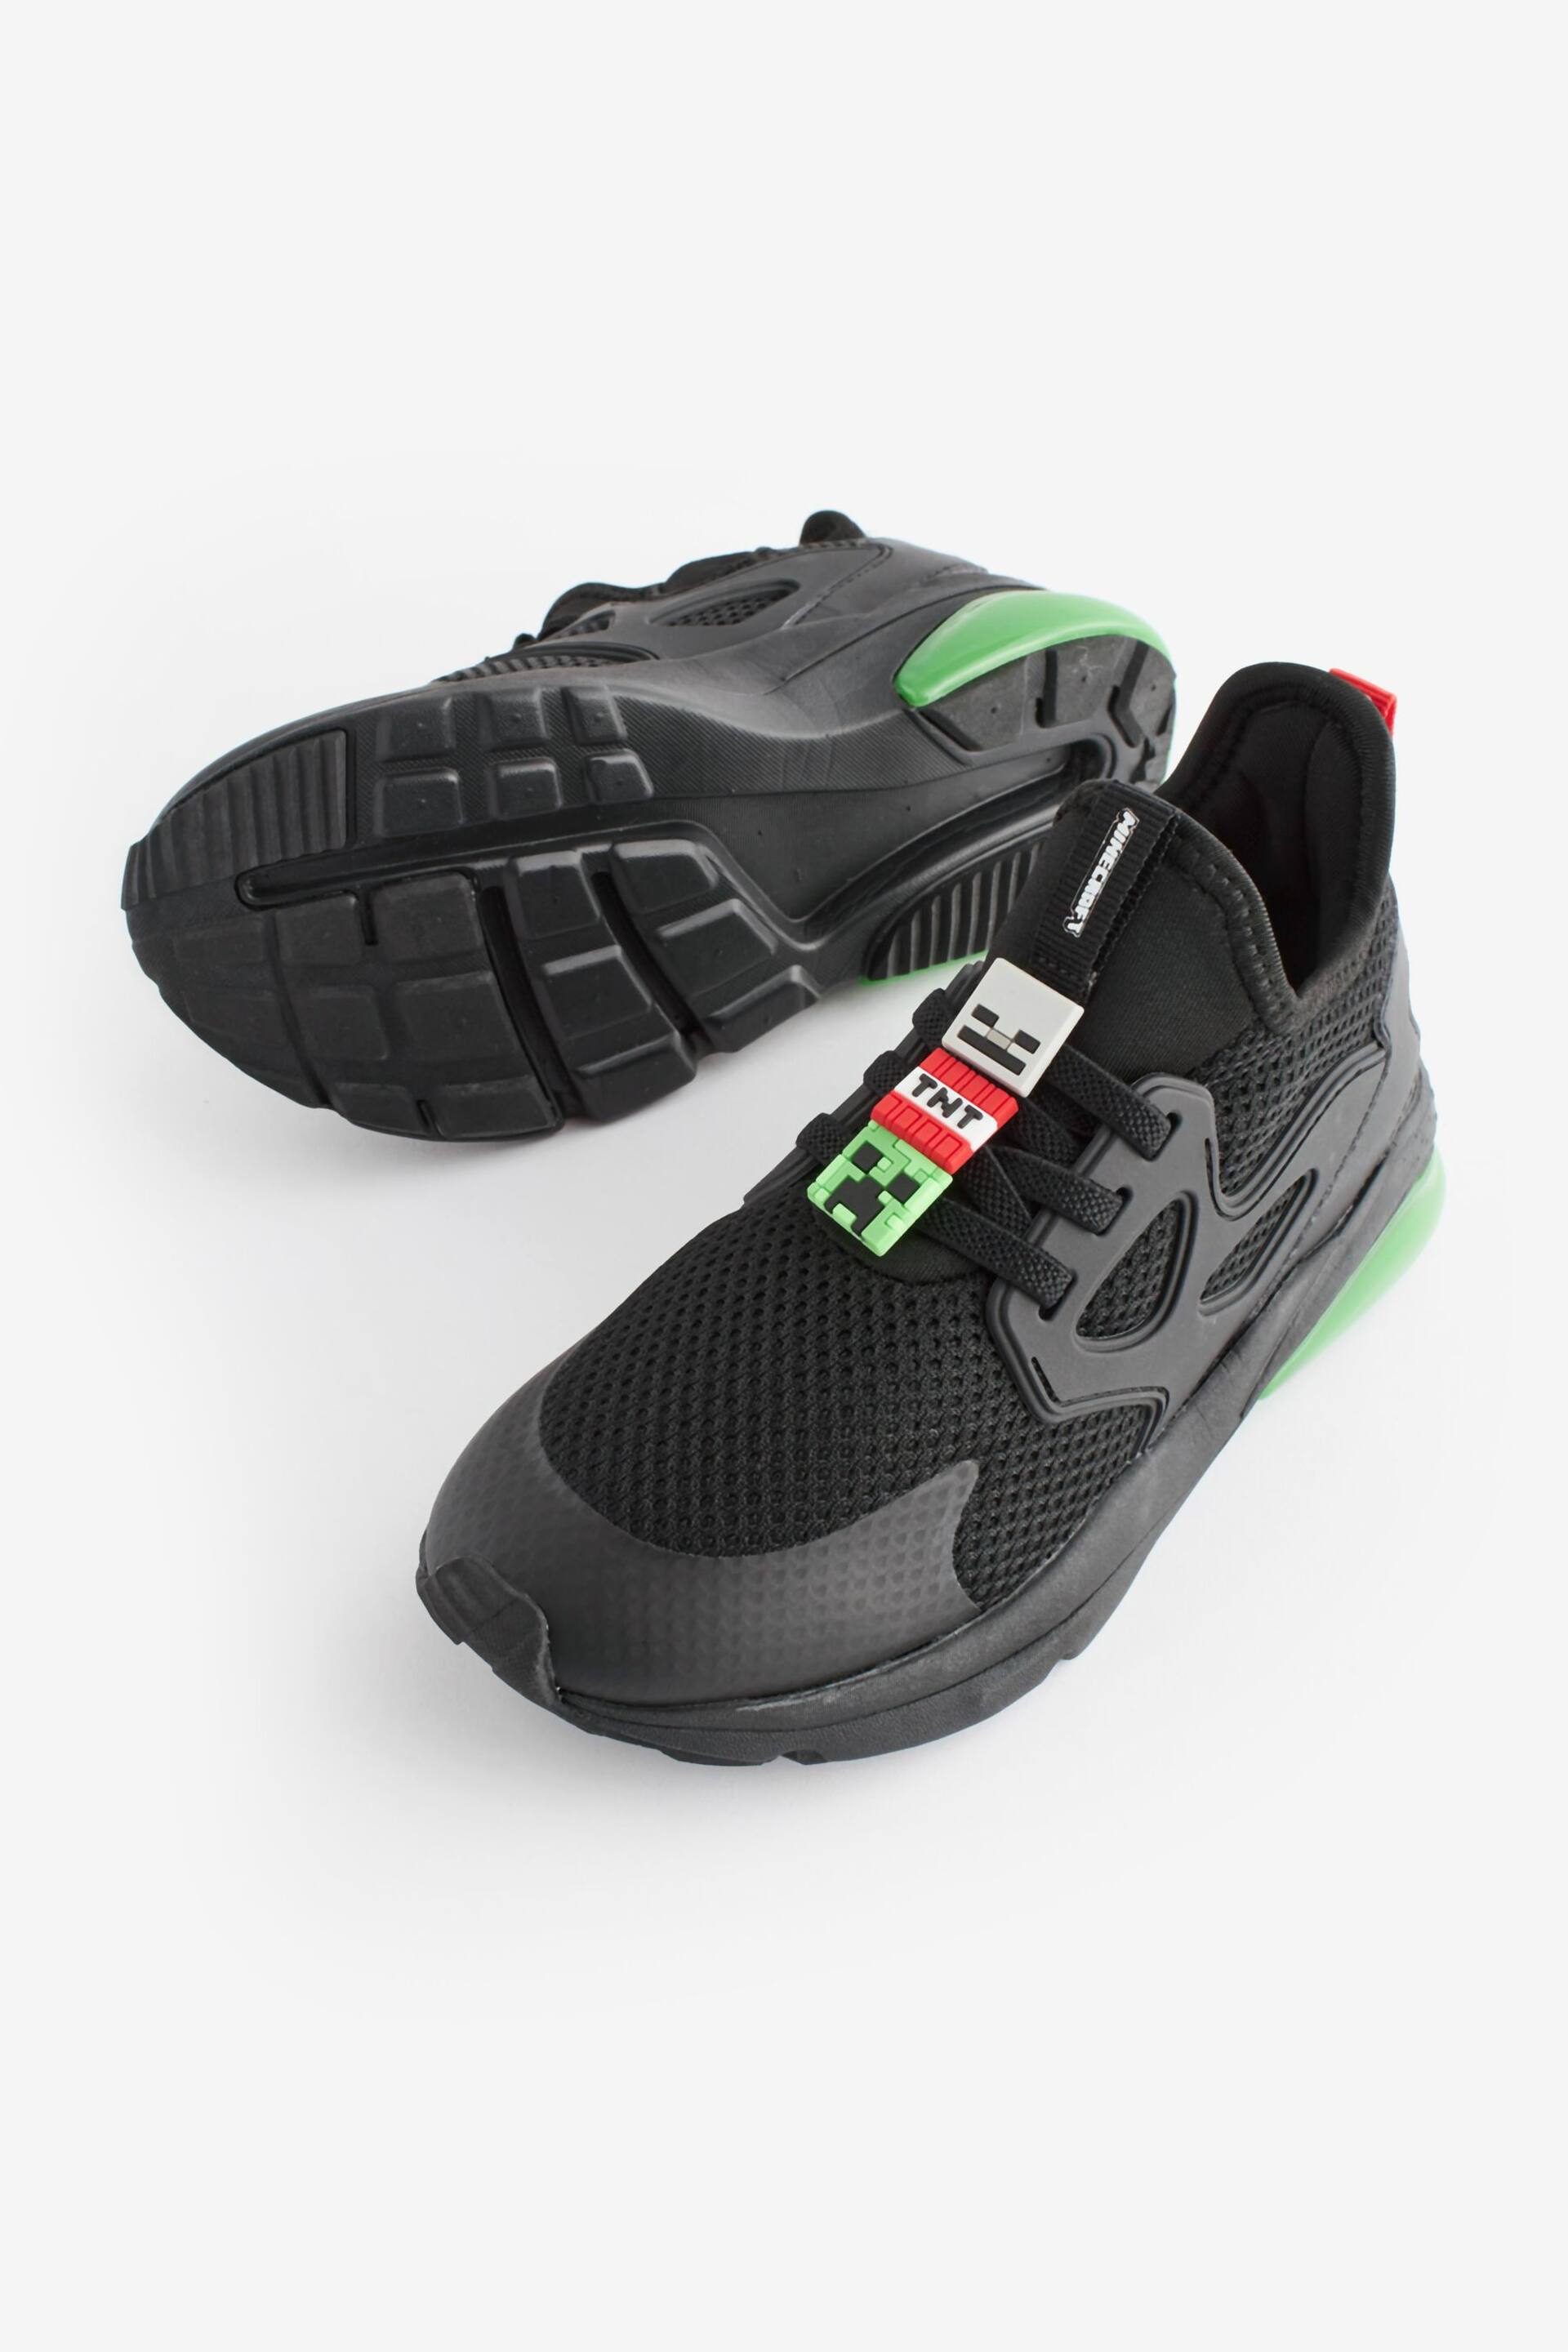 Black/Green Minecraft Elastic Lace Trainers - Image 3 of 6